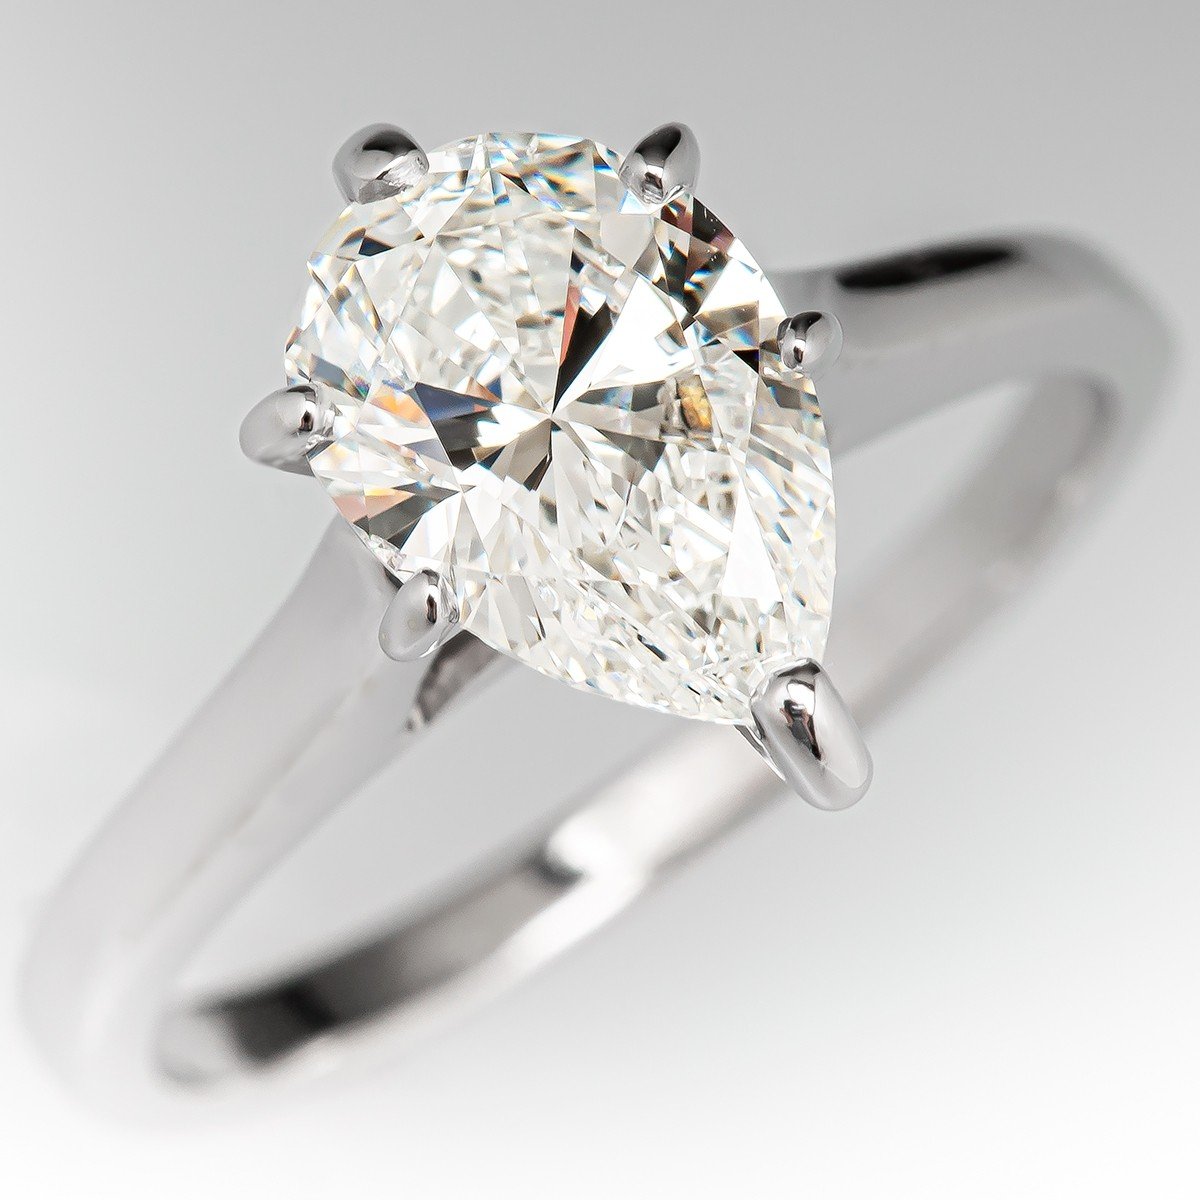 1.5 Carat Pear Cut Diamond Solitaire Engagement Ring 1.55ct G/SI2